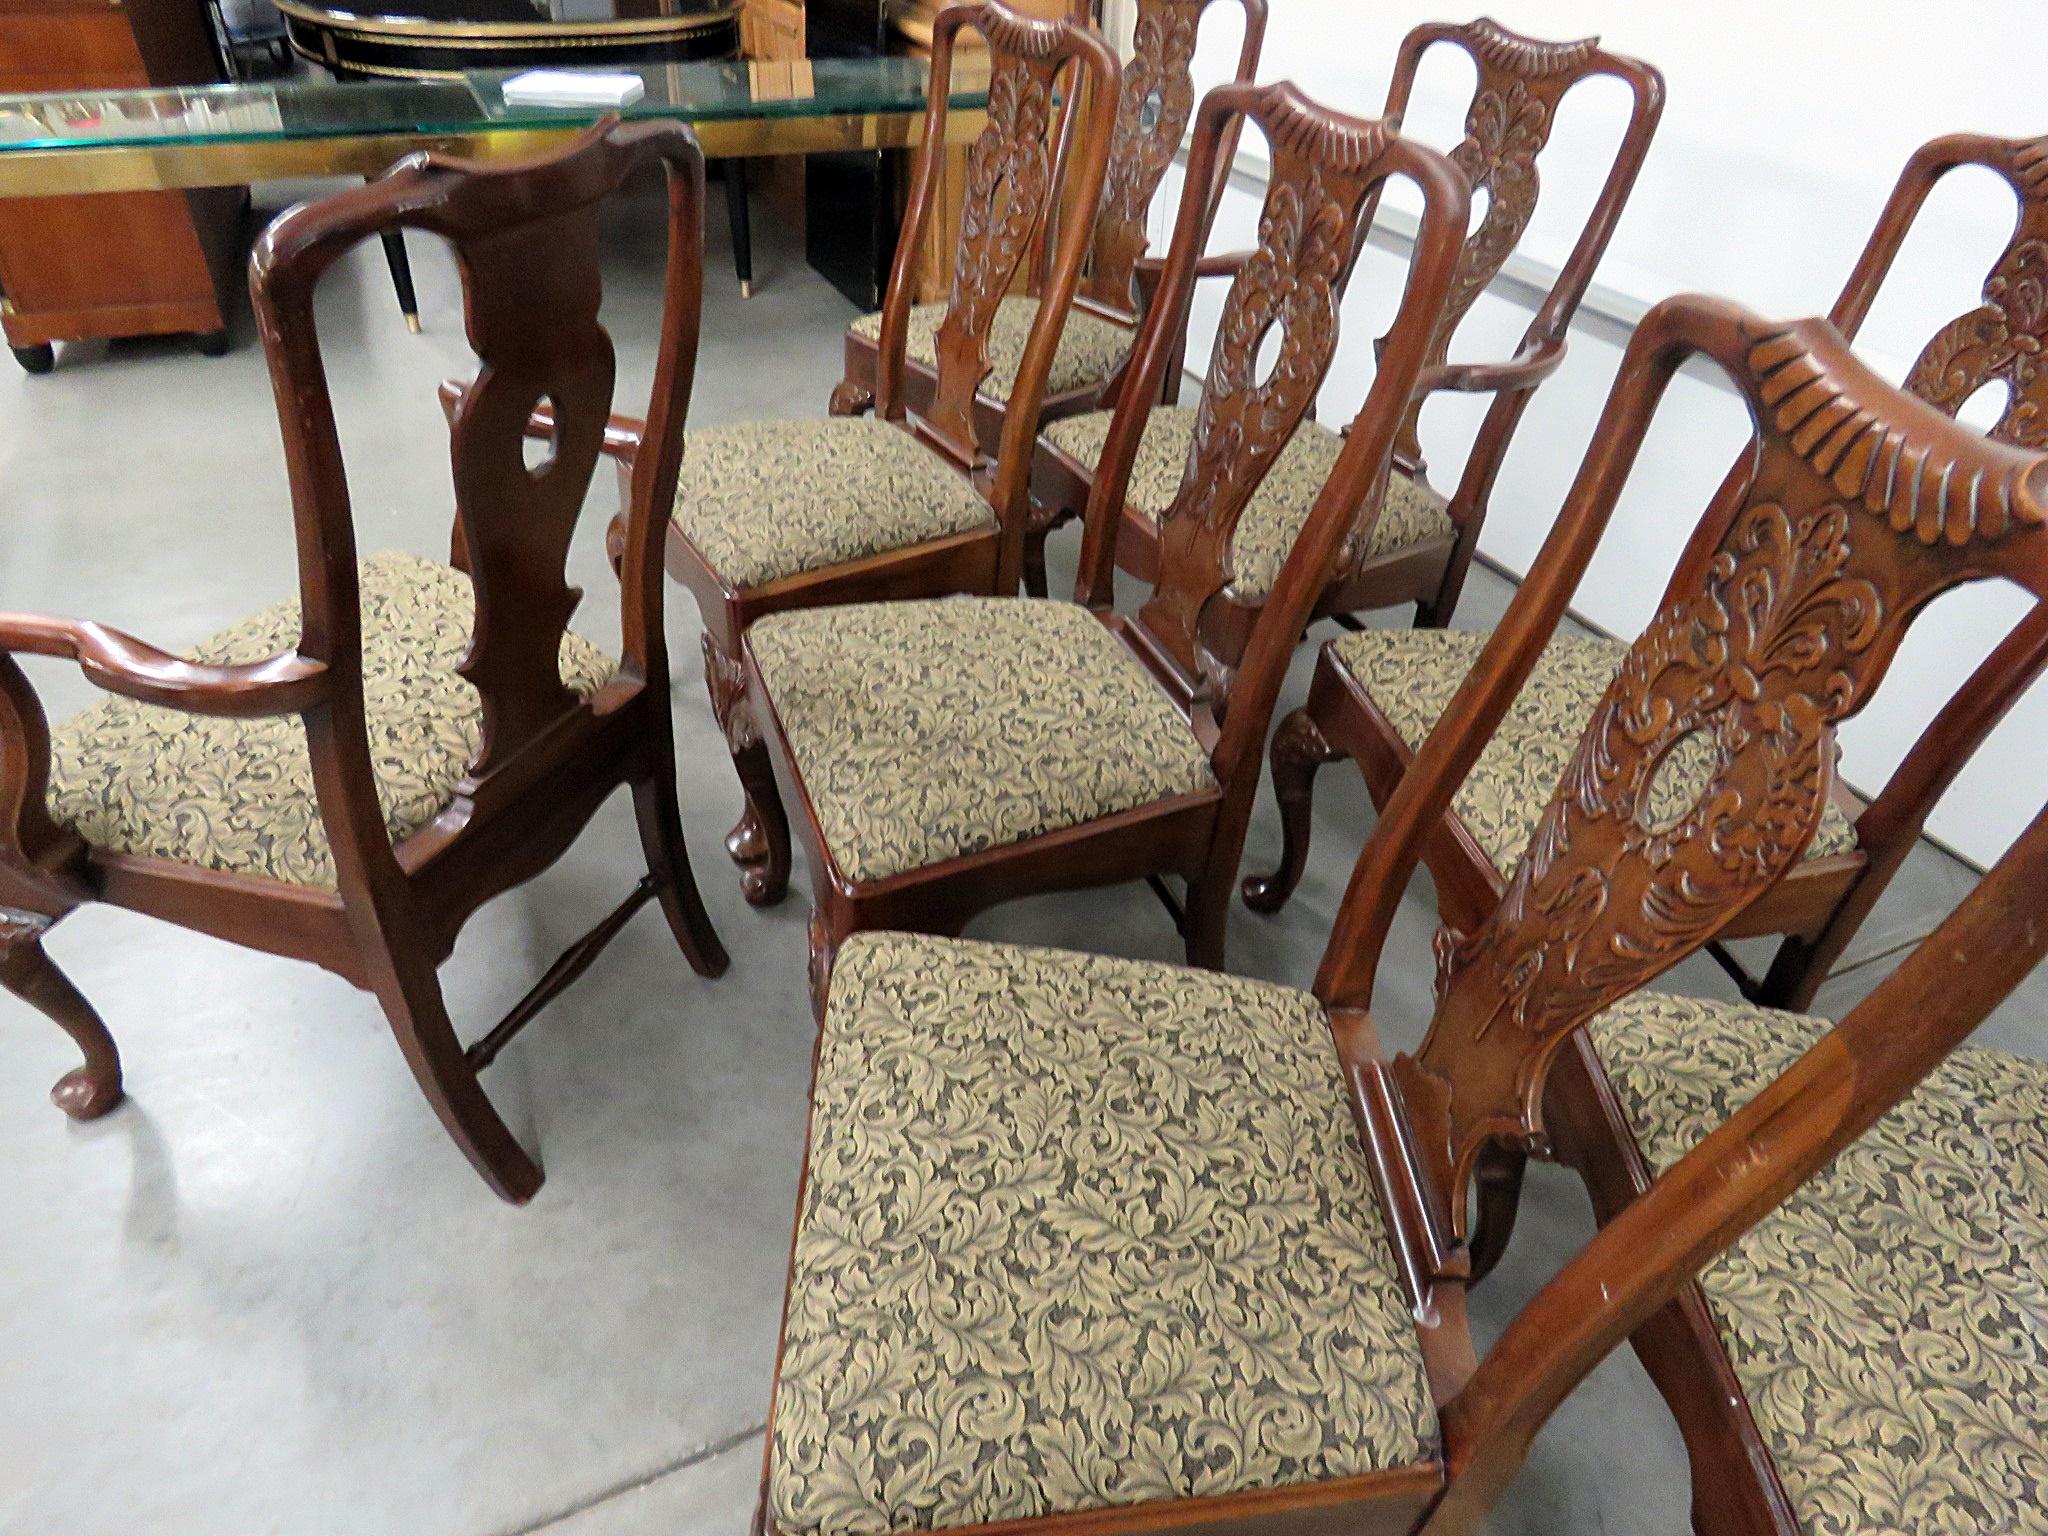 Set of 8 Henredon Georgian style mahogany dining chairs. The 2 arm chairs measure 39.5